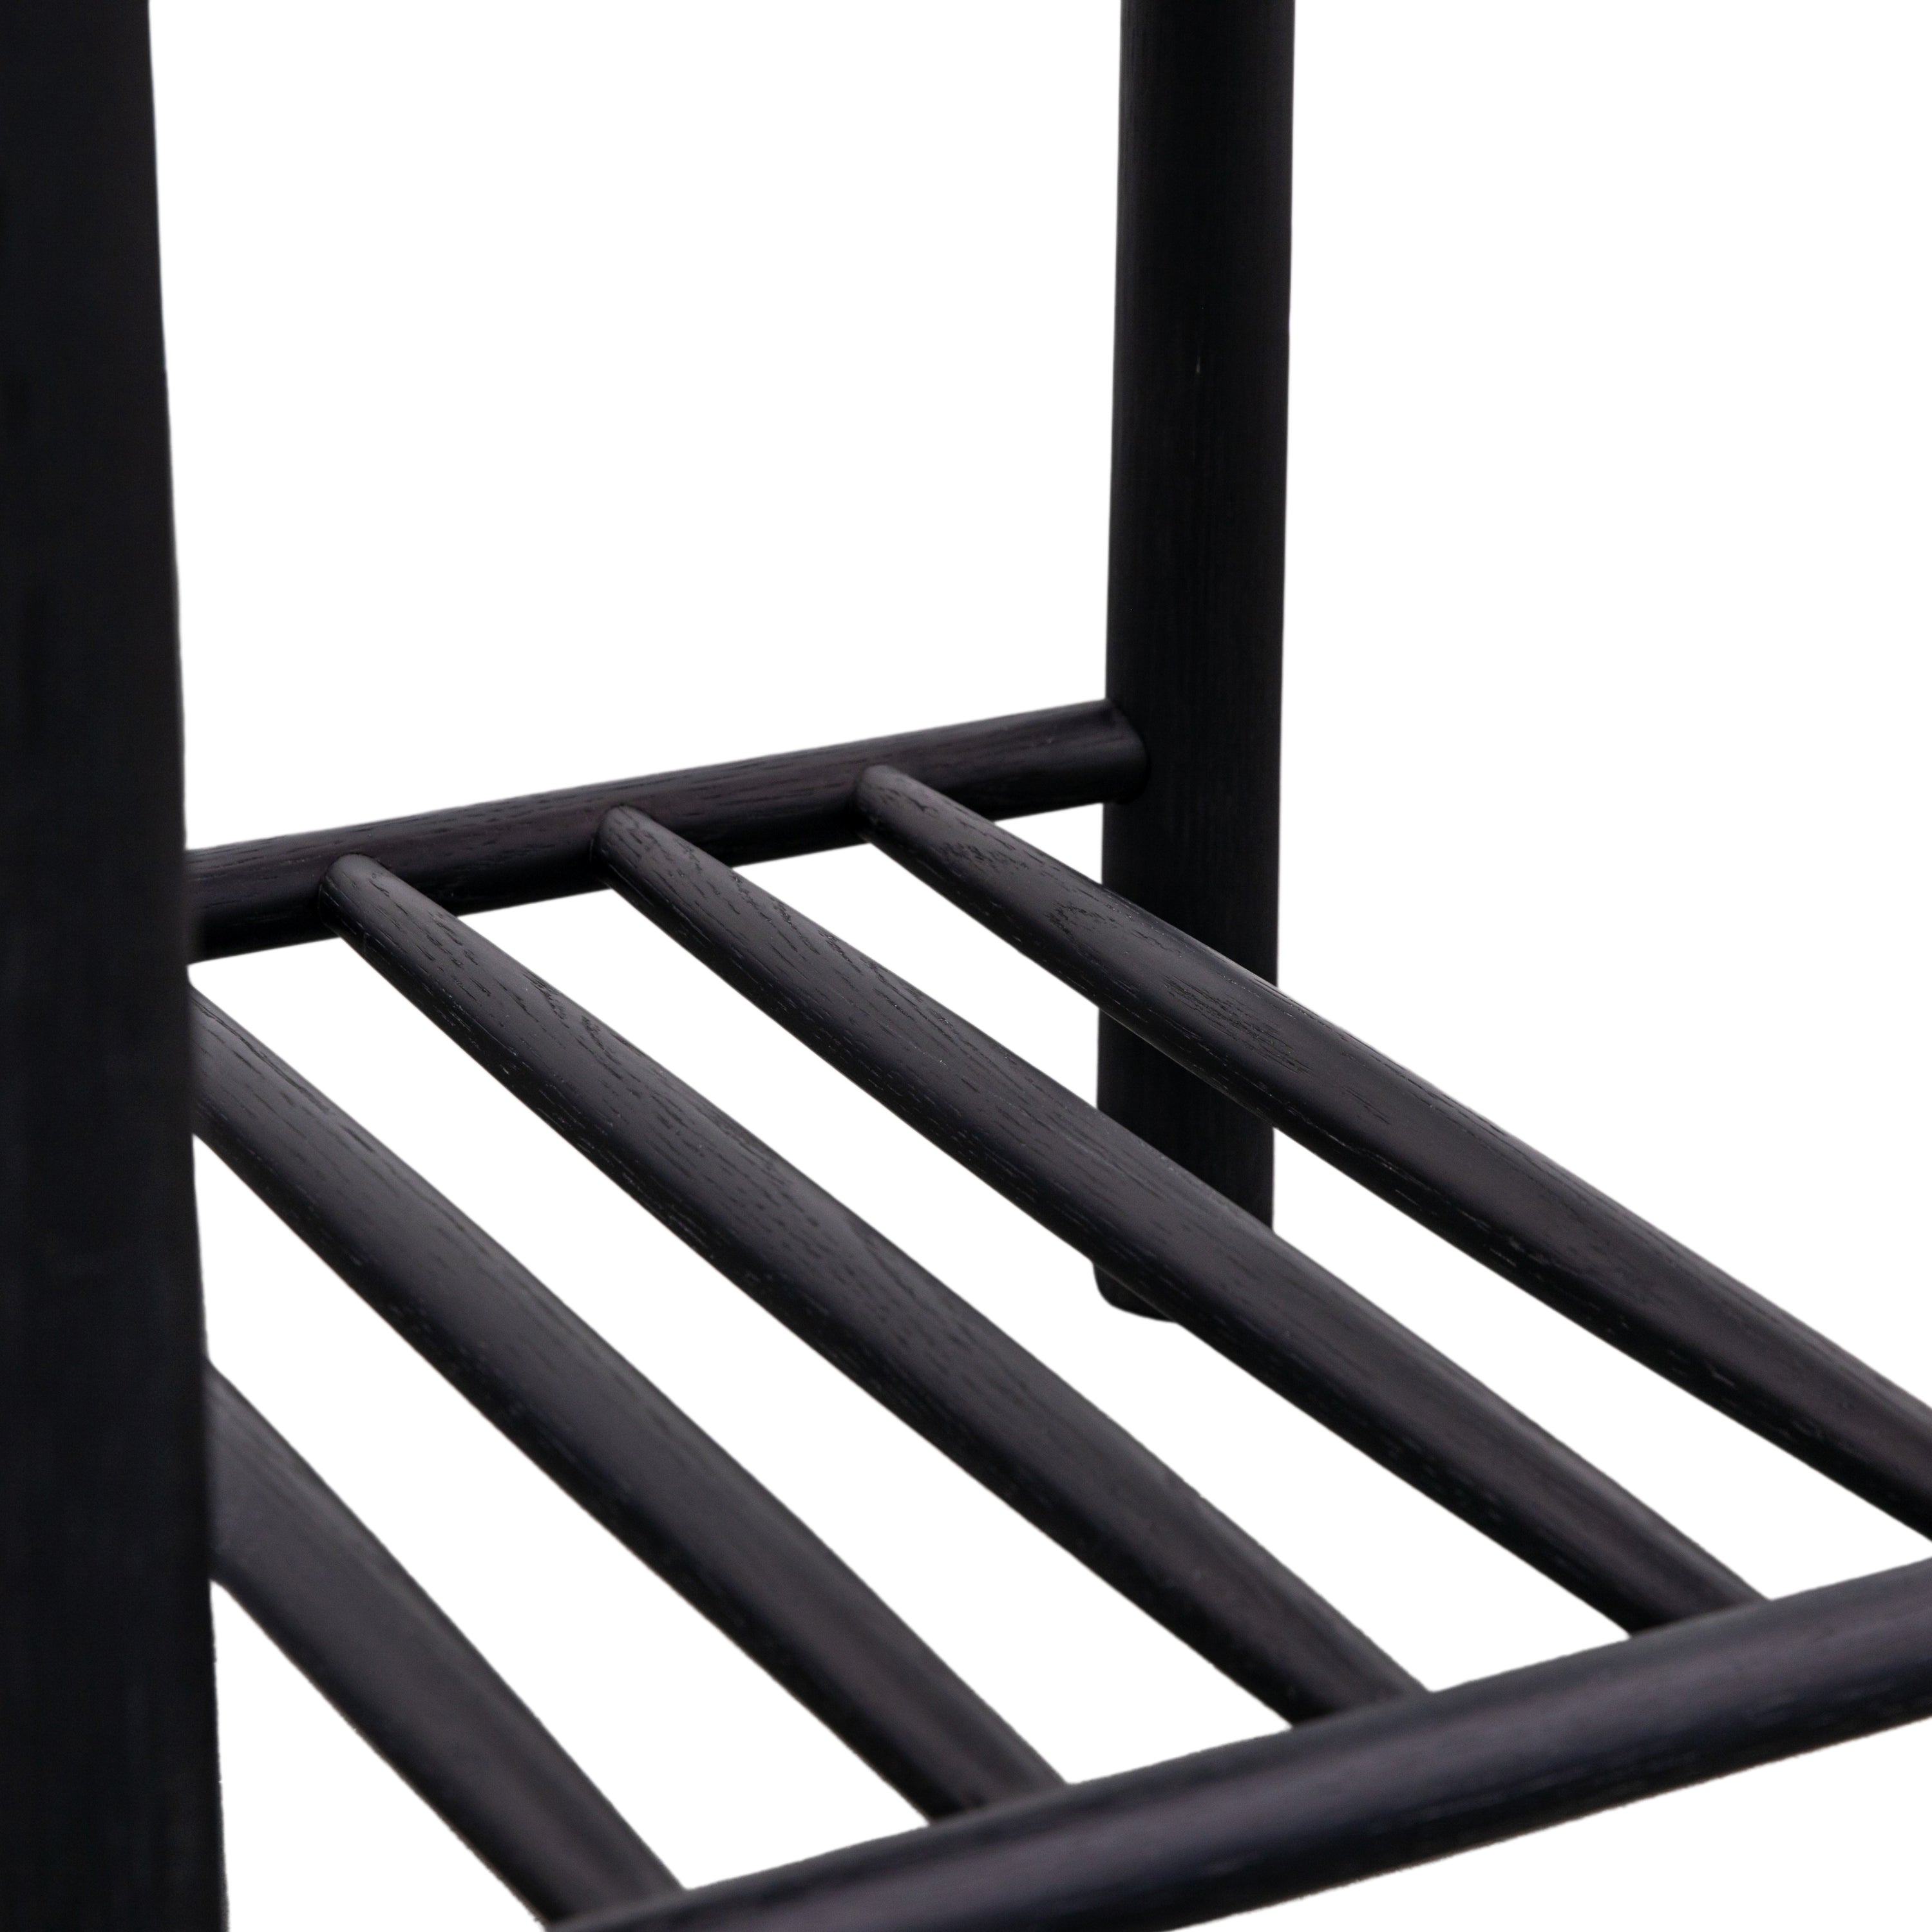 AXEL Nordic side table in black with spindle lower shelf | MalletandPlane.com